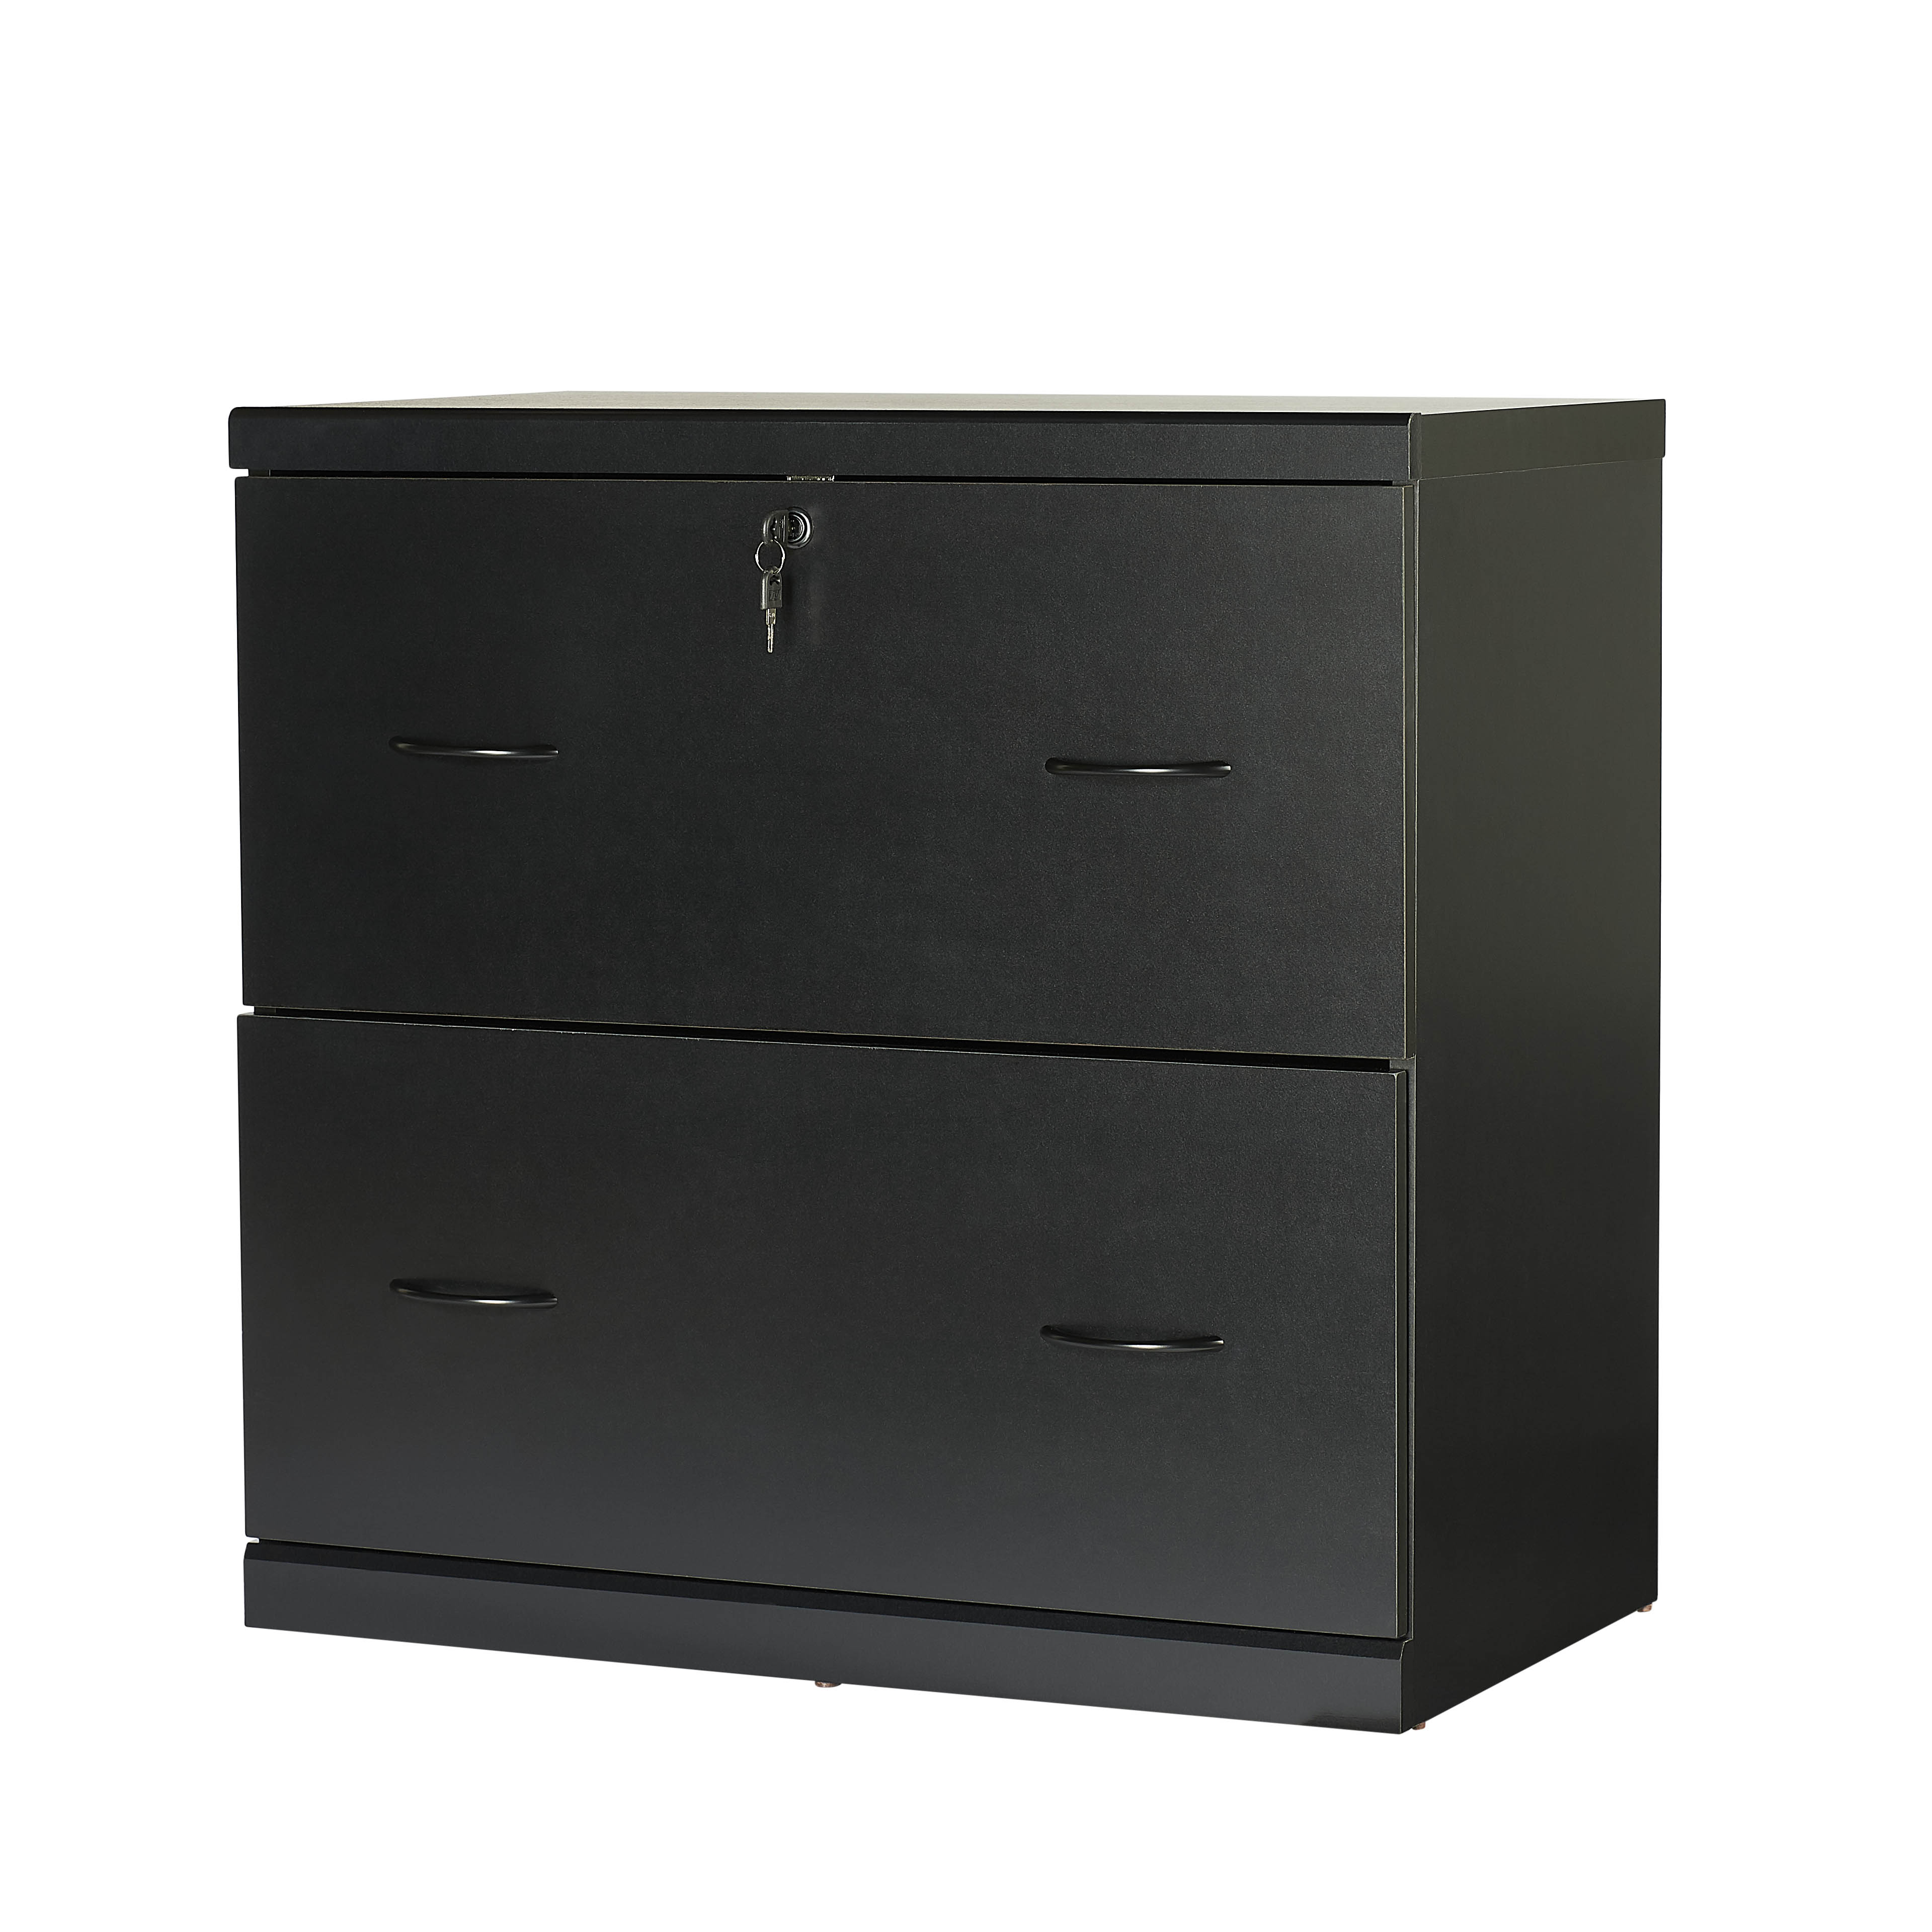 Mainstays 2 Drawer Lateral Locking File Cabinet Walmart pertaining to size 3840 X 3840